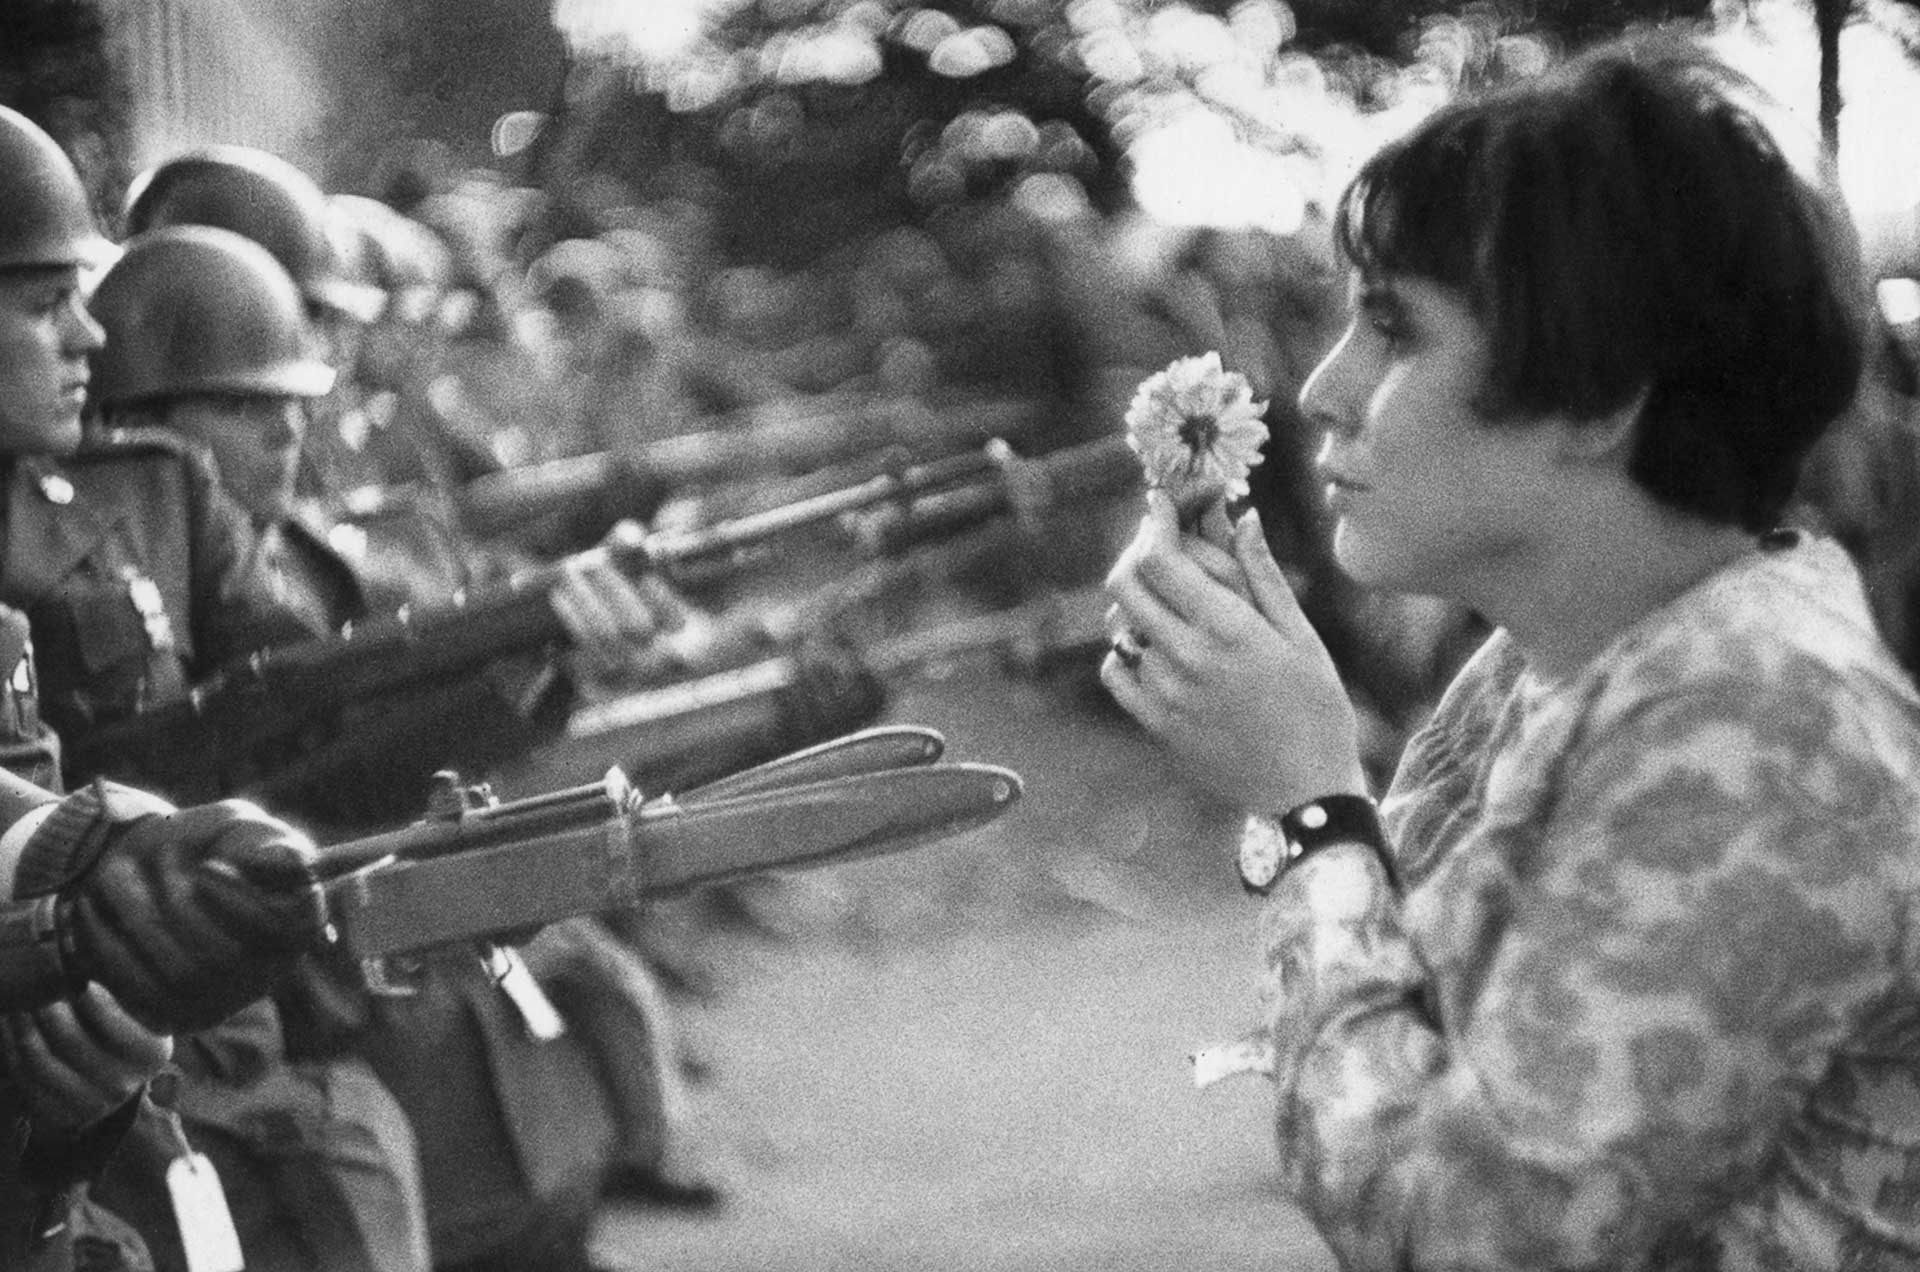 On the right, a girl in side-profile holds a chrysanthemum flower in front of her face. On the left, a line of soldiers stand in a line with their bayonets pointed at her.